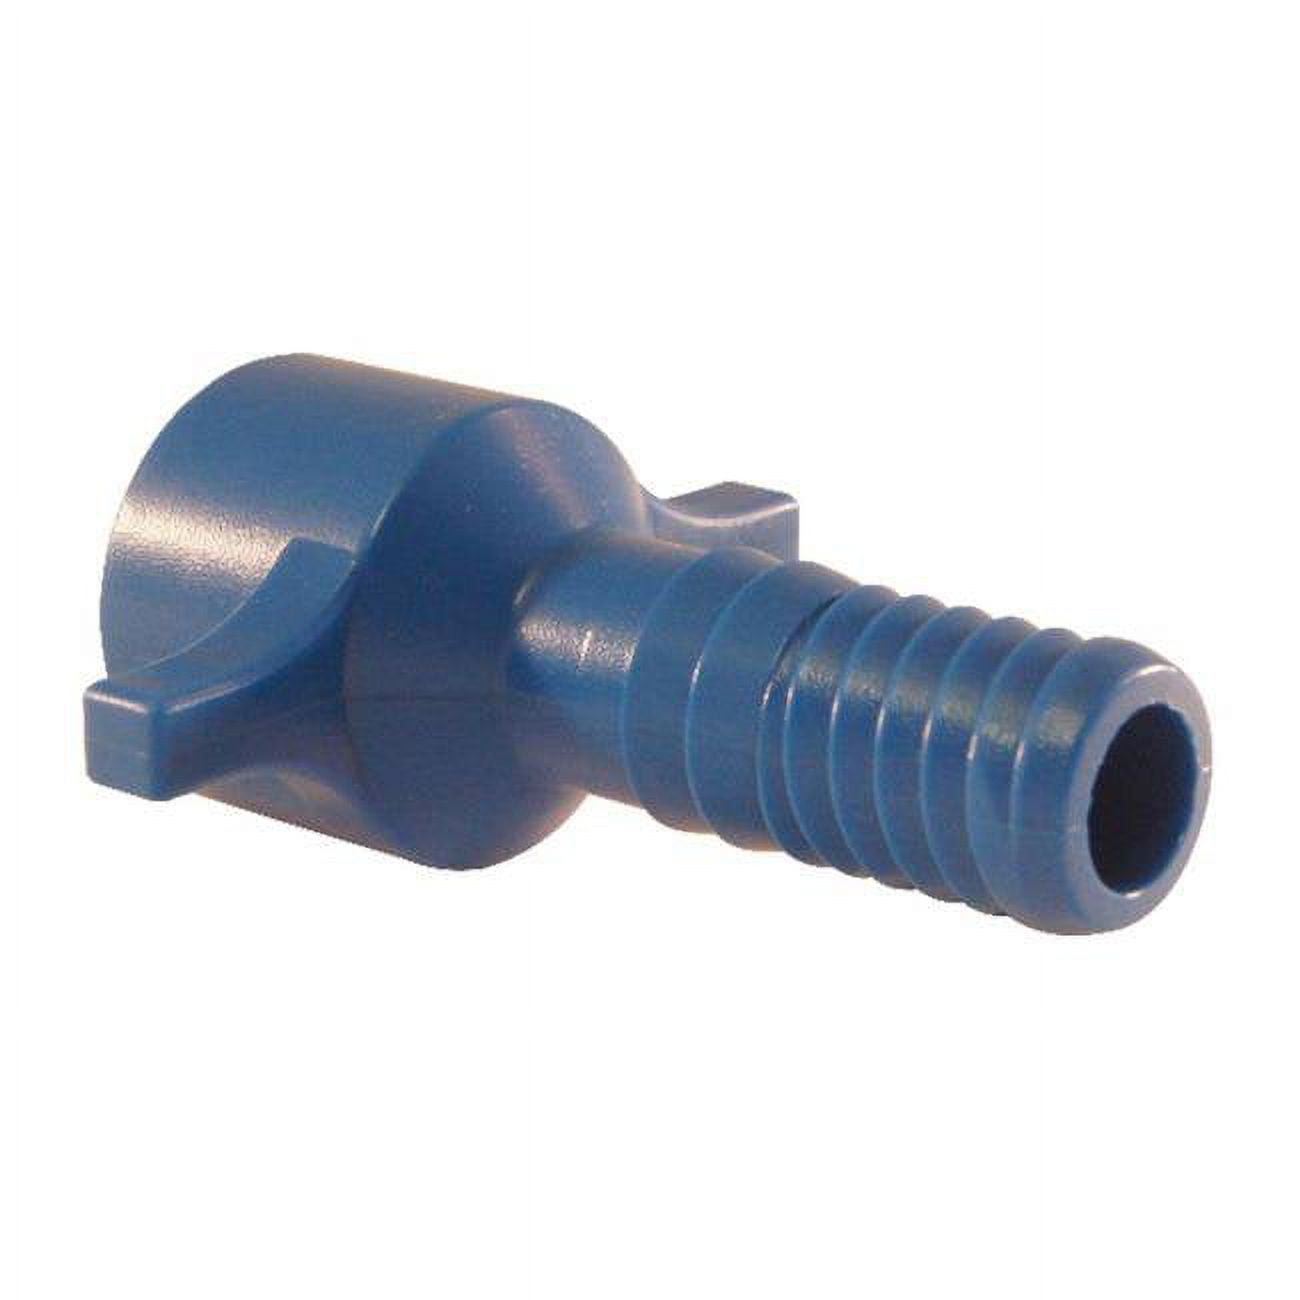 4814836 0.5 In. Insert X 0.5 In. Dia. Fpt Polypropylene Female Adapter, Blue